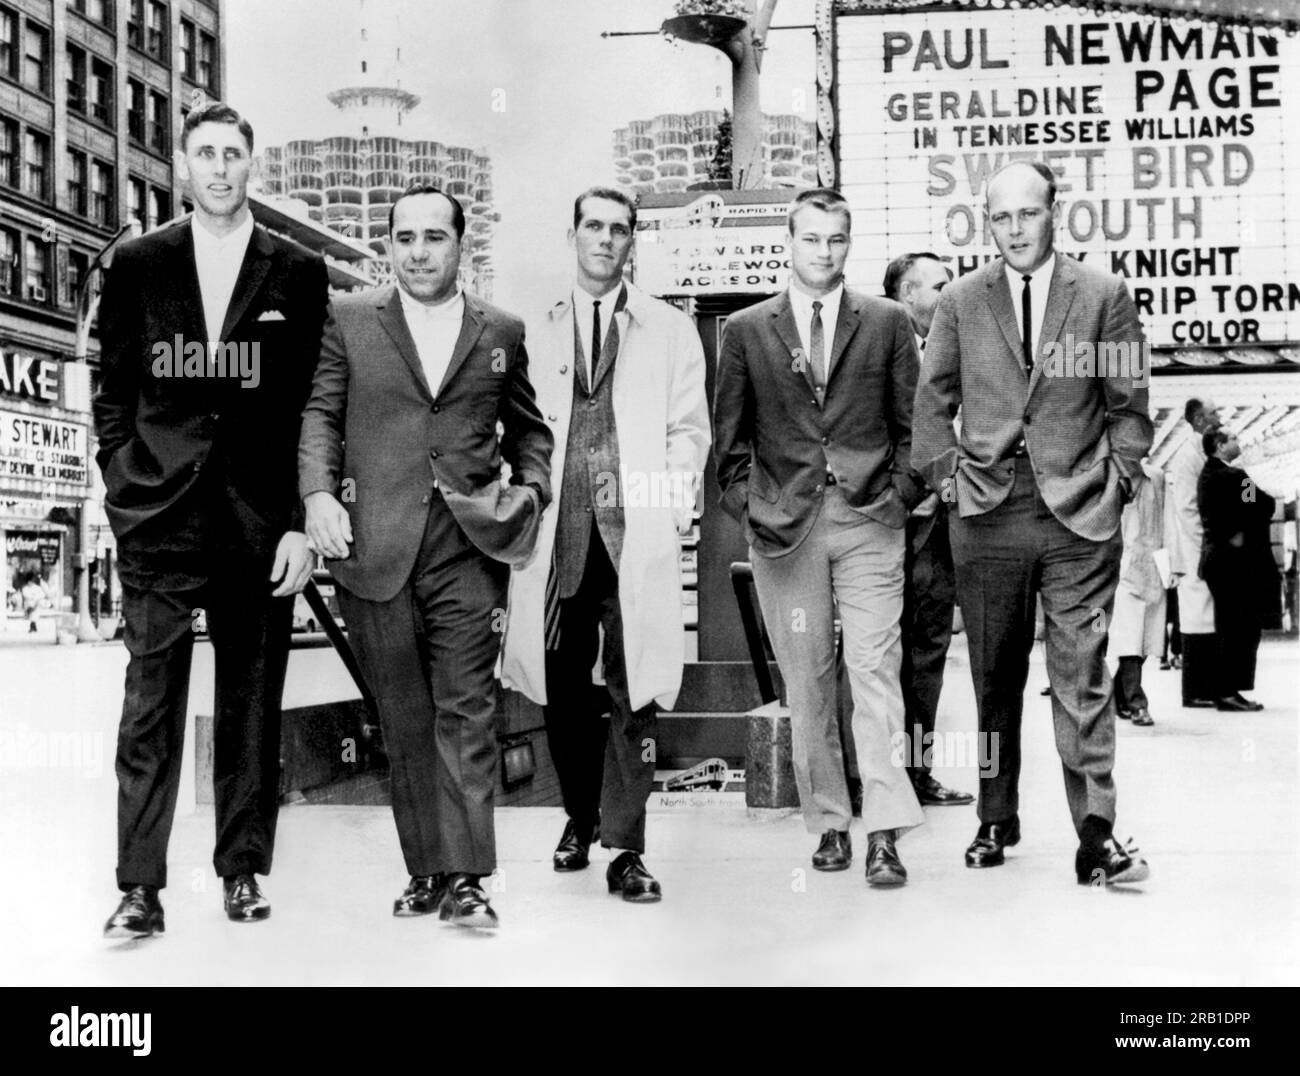 Chicago, Illinois:  May 2, 1962 New York Yankee players looking for relaxation during their series against the White Sox walk down State Street en route to a movie. L-R: Jim Coates, Yogi Berra, Phil Linz, Jim Boulton and Bud Daley. Stock Photo